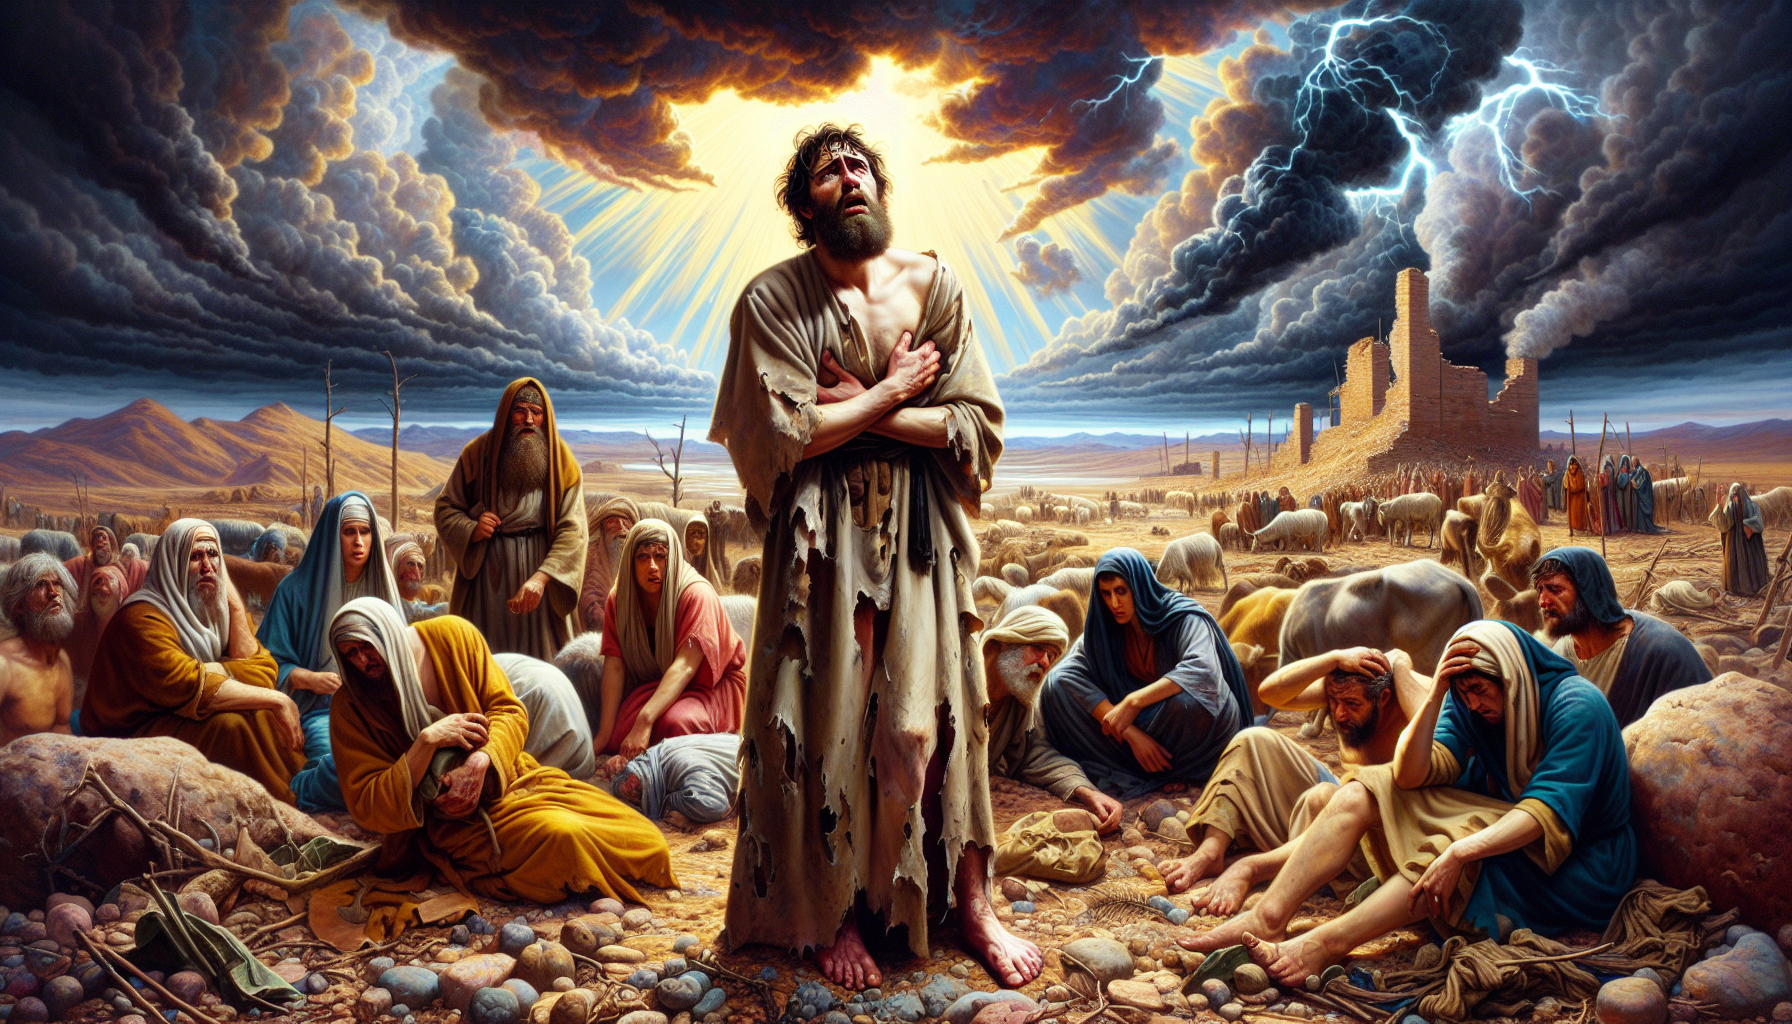 A vivid, dramatic scene from the Book of Job in the Bible. Job, dressed in tattered clothes, sits on a pile of ashes with a sorrowful expression. Surrounding him are ruined remnants of his once prospe